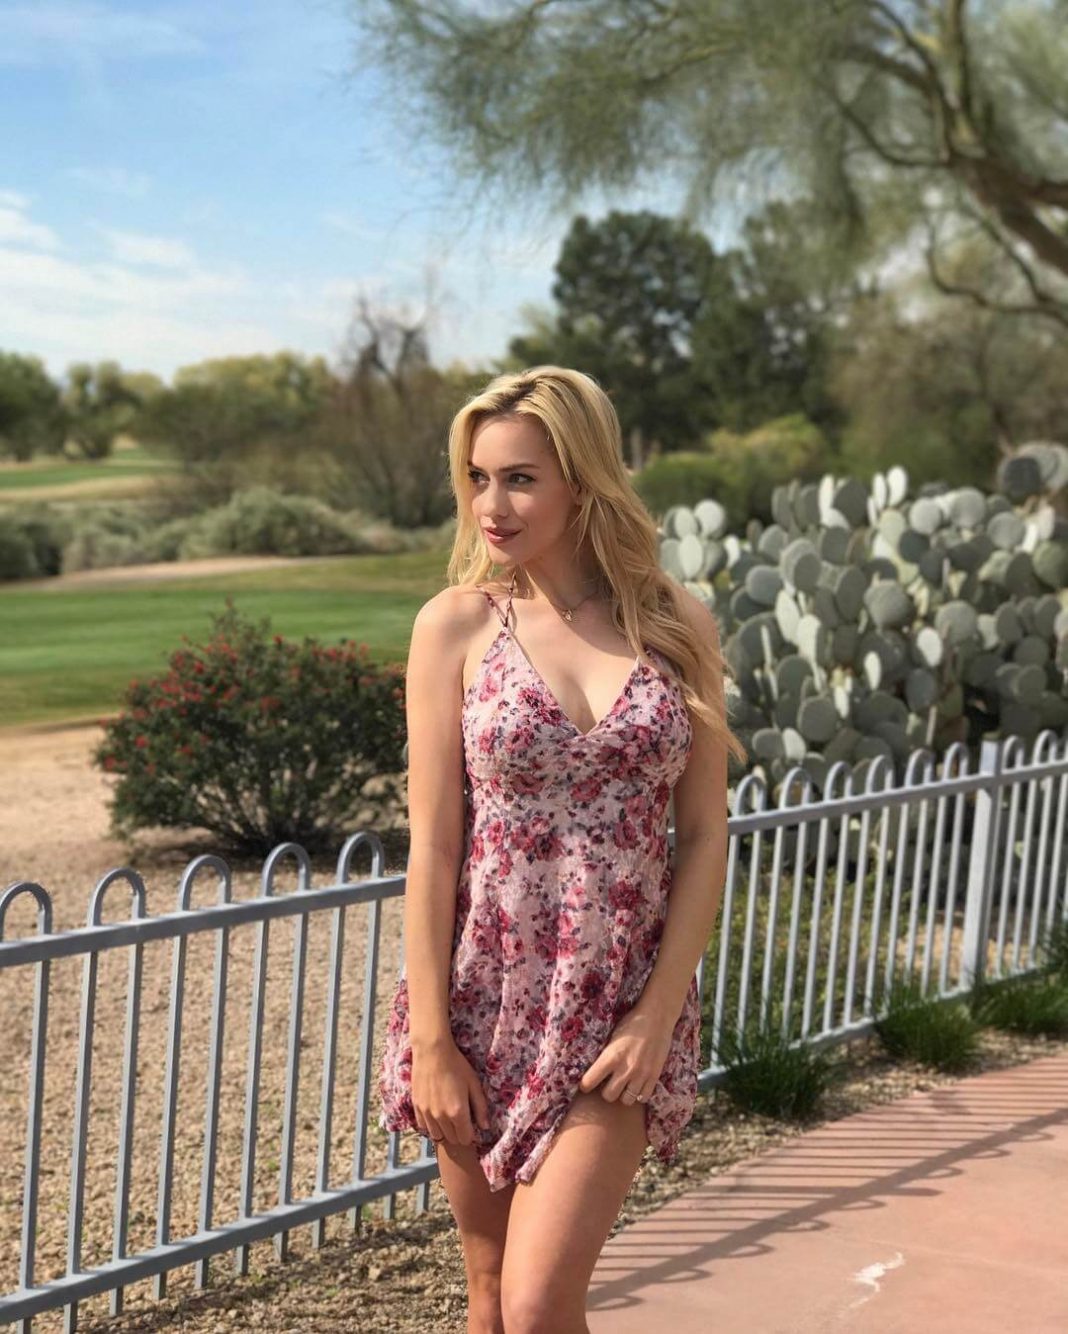 51 Paige Spiranac Nude Pictures Brings Together Style, Sassiness And Sexiness 236